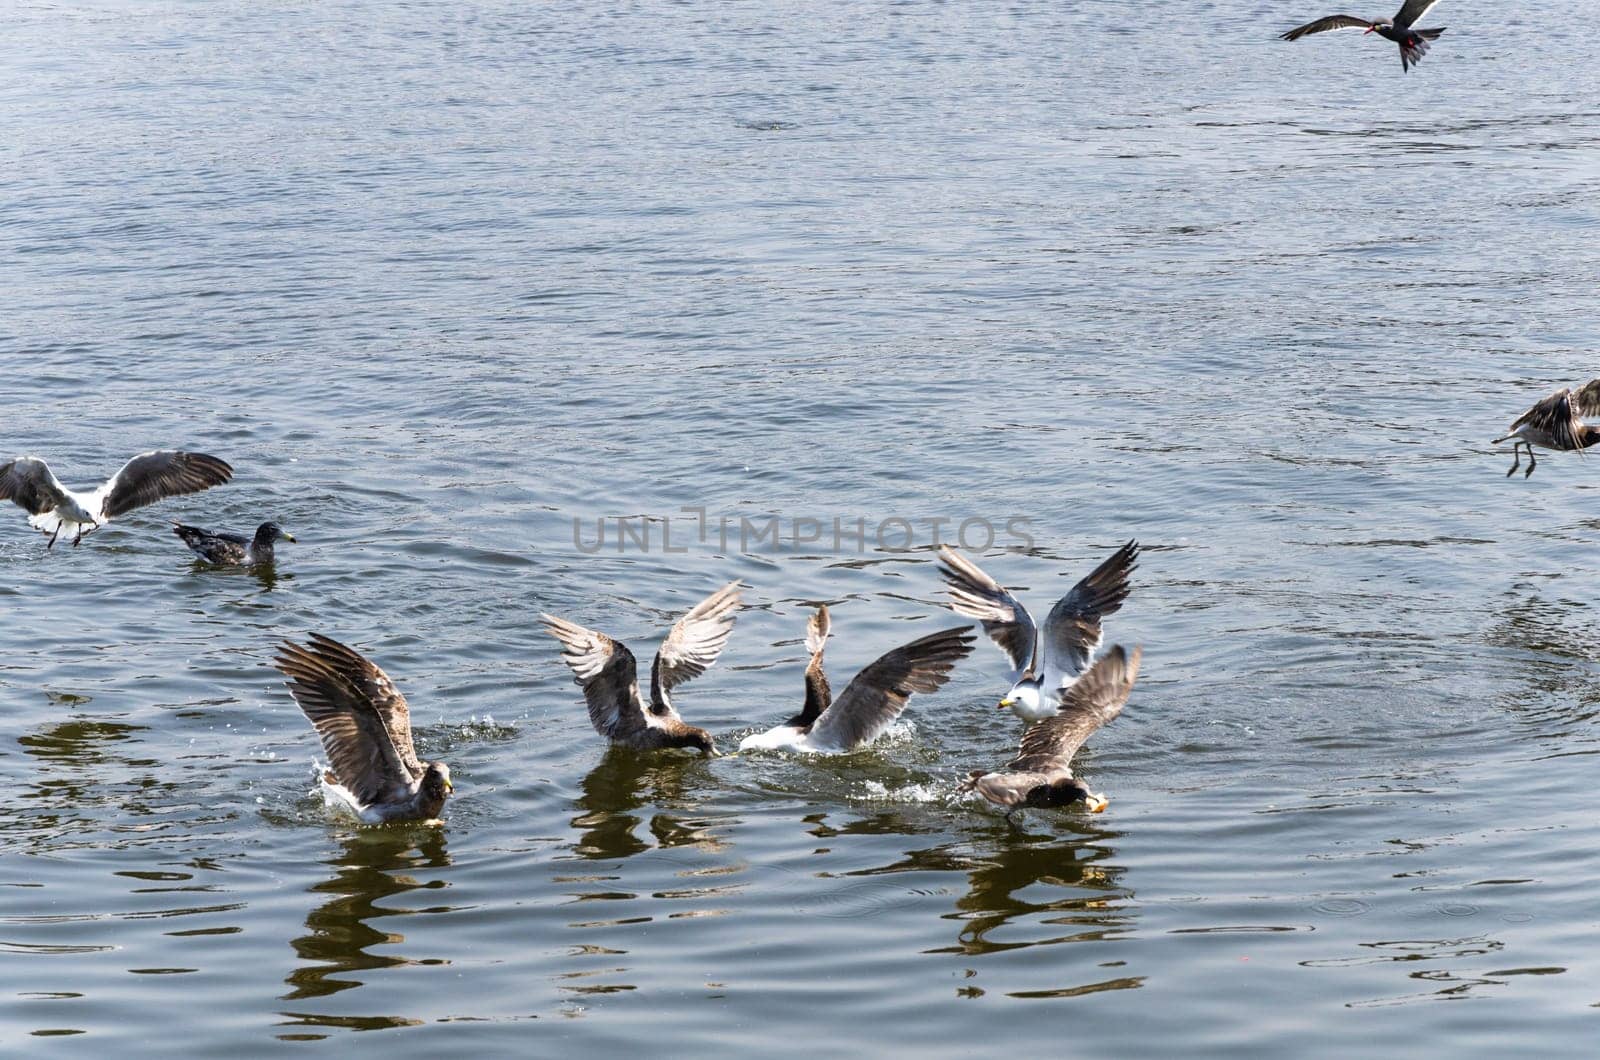 Seagulls, Seagull birds in water, Close up view of white birds, natural blue water background. by Peruphotoart